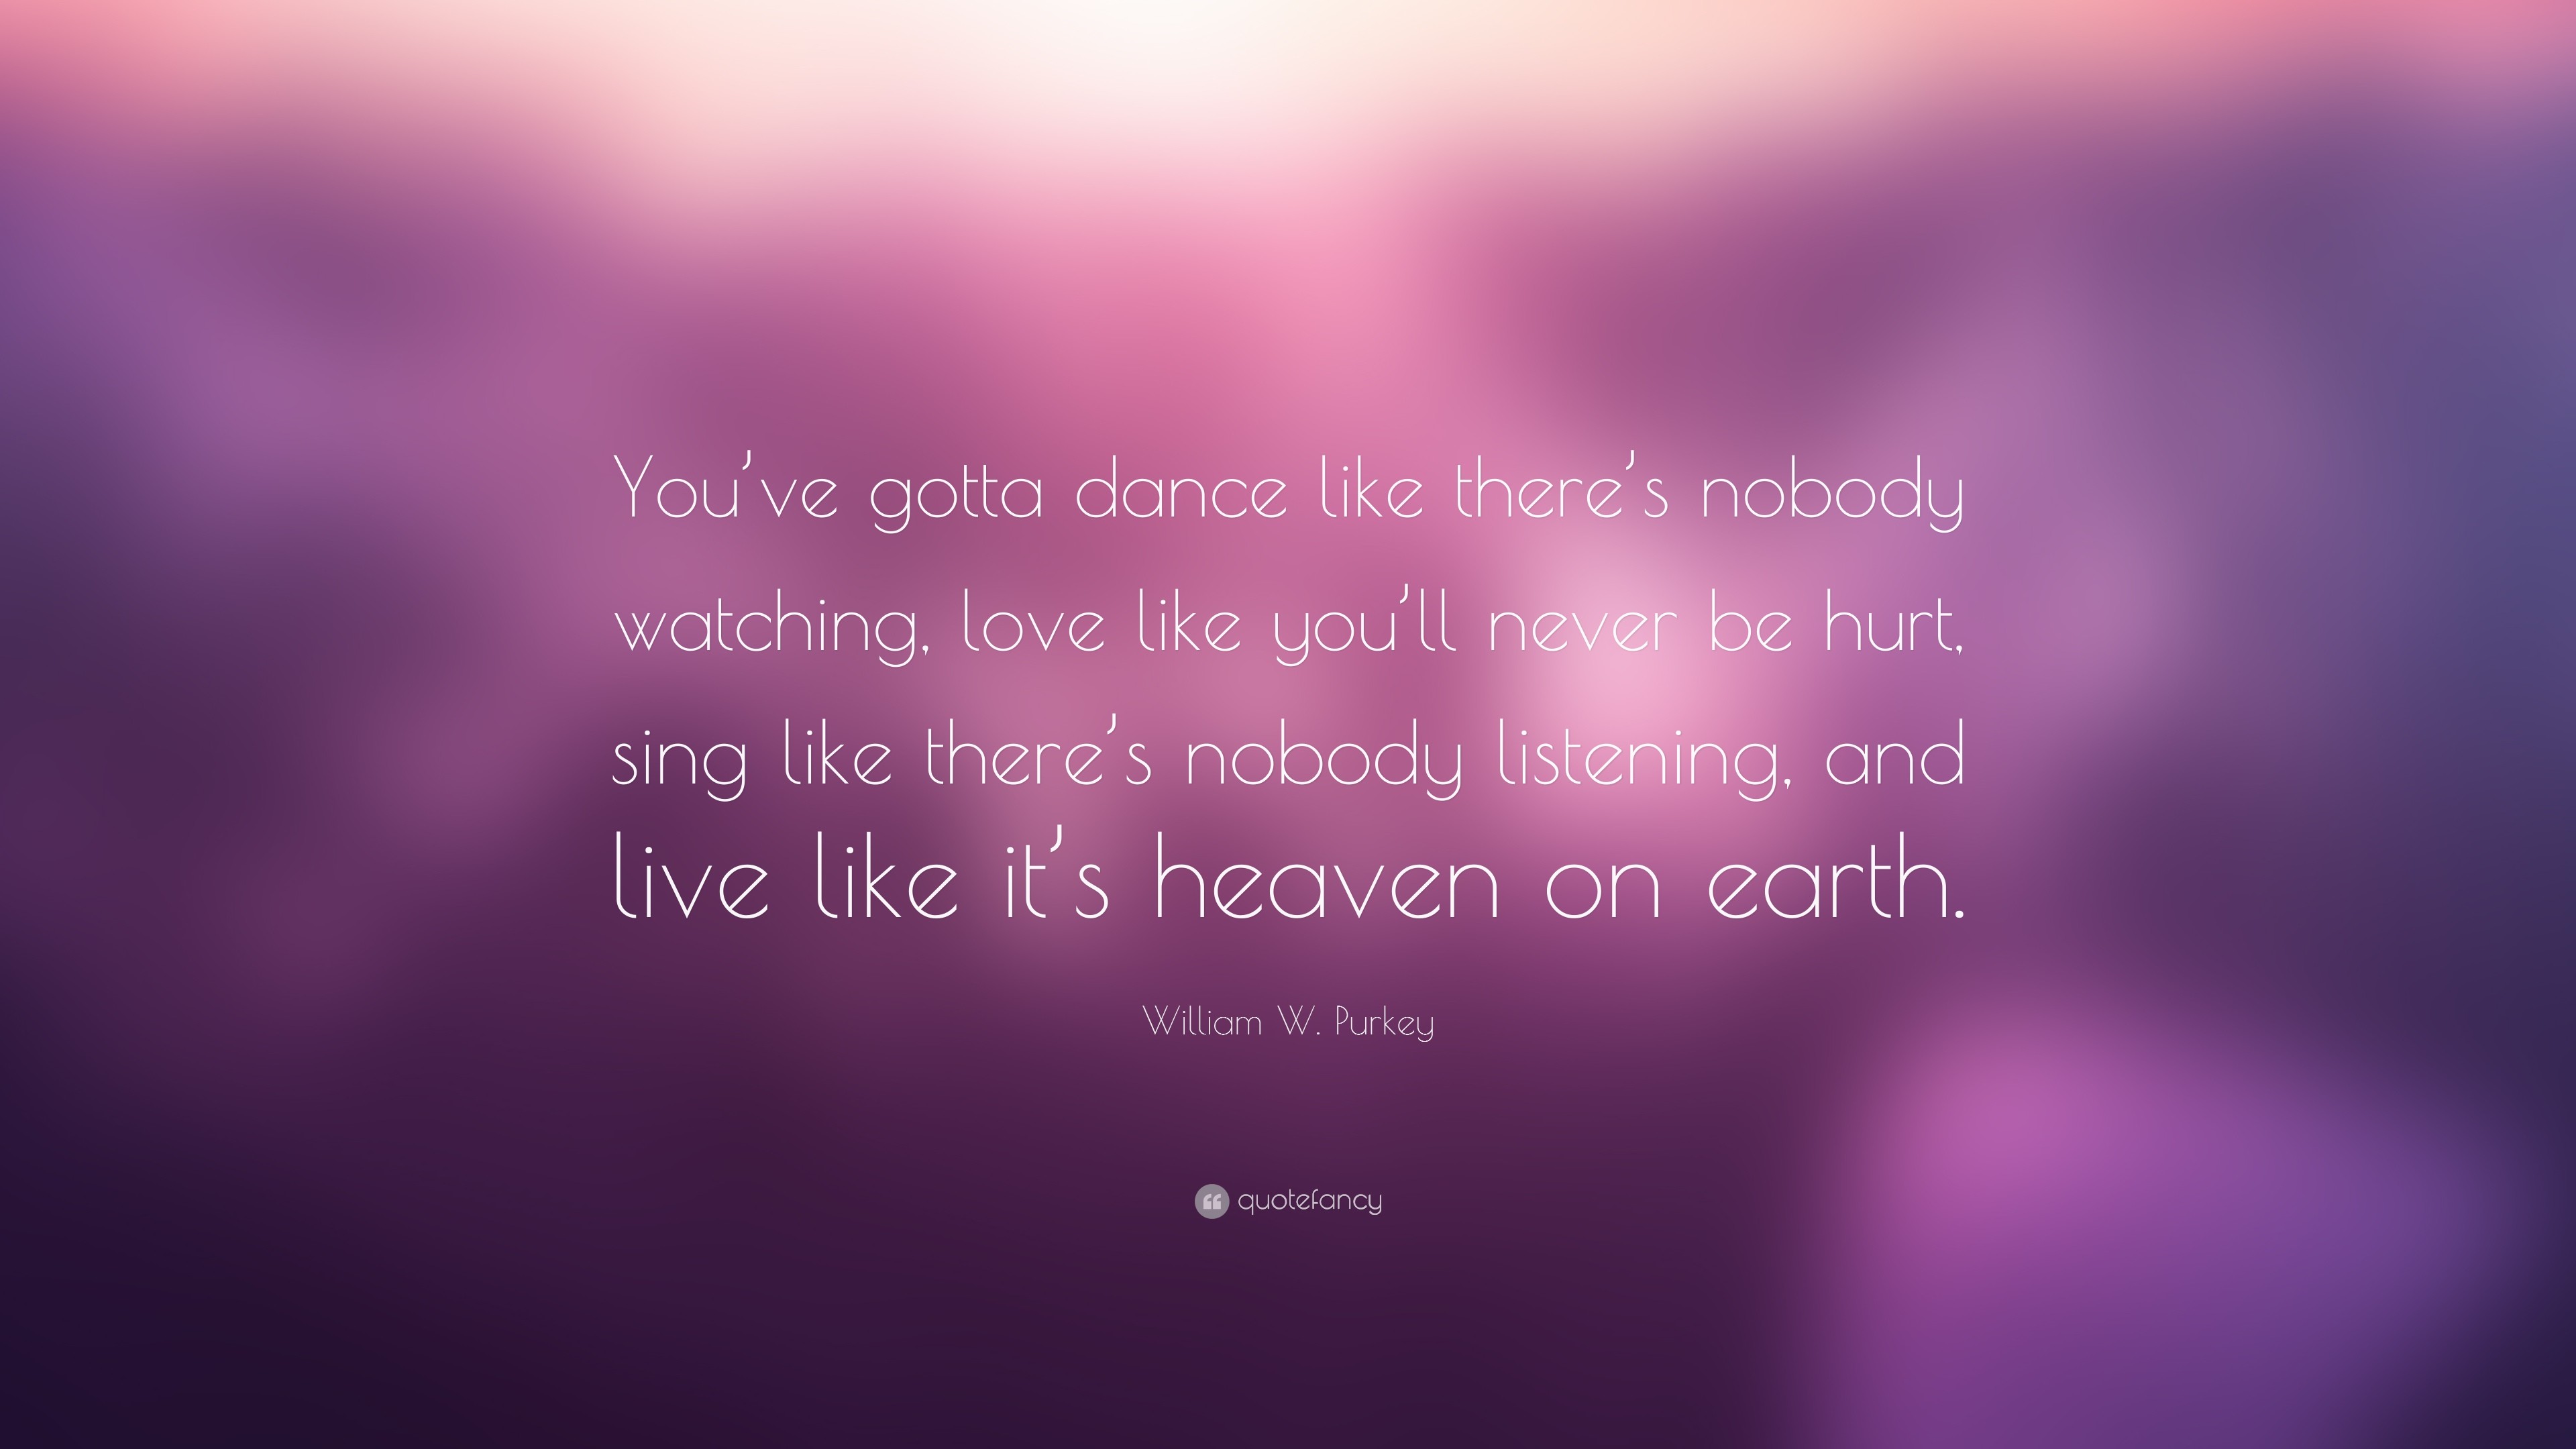 3840x2160 Life Quotes: “You've gotta dance like there's nobody watching, love like